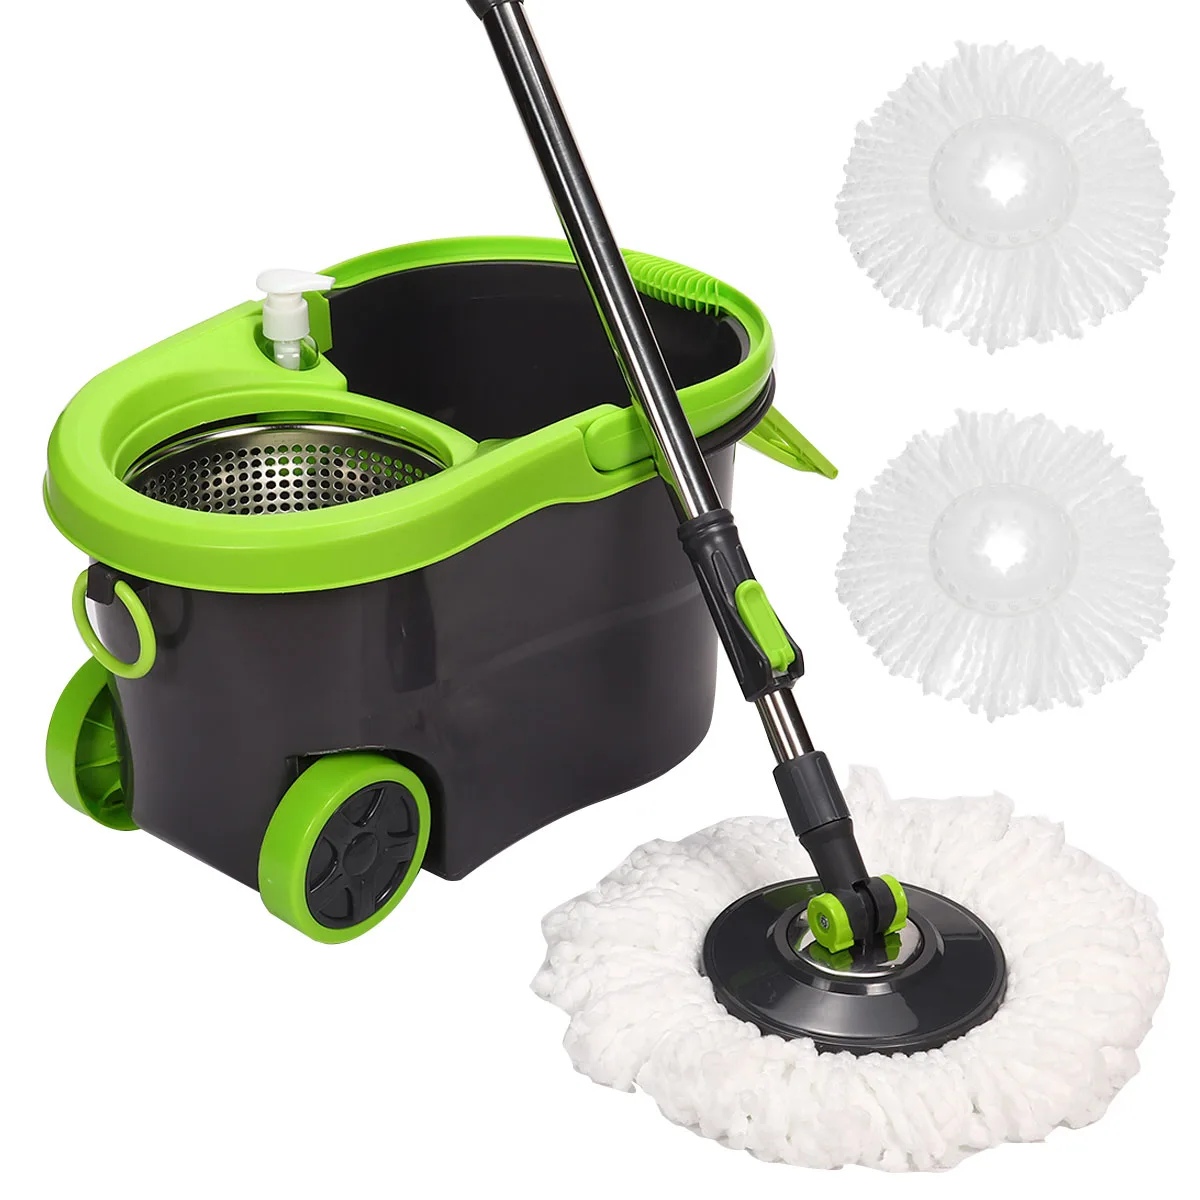 Microfiber Mop Head For 360° Rotating Spin Mop Bucket Dry Wet Cleaning New 